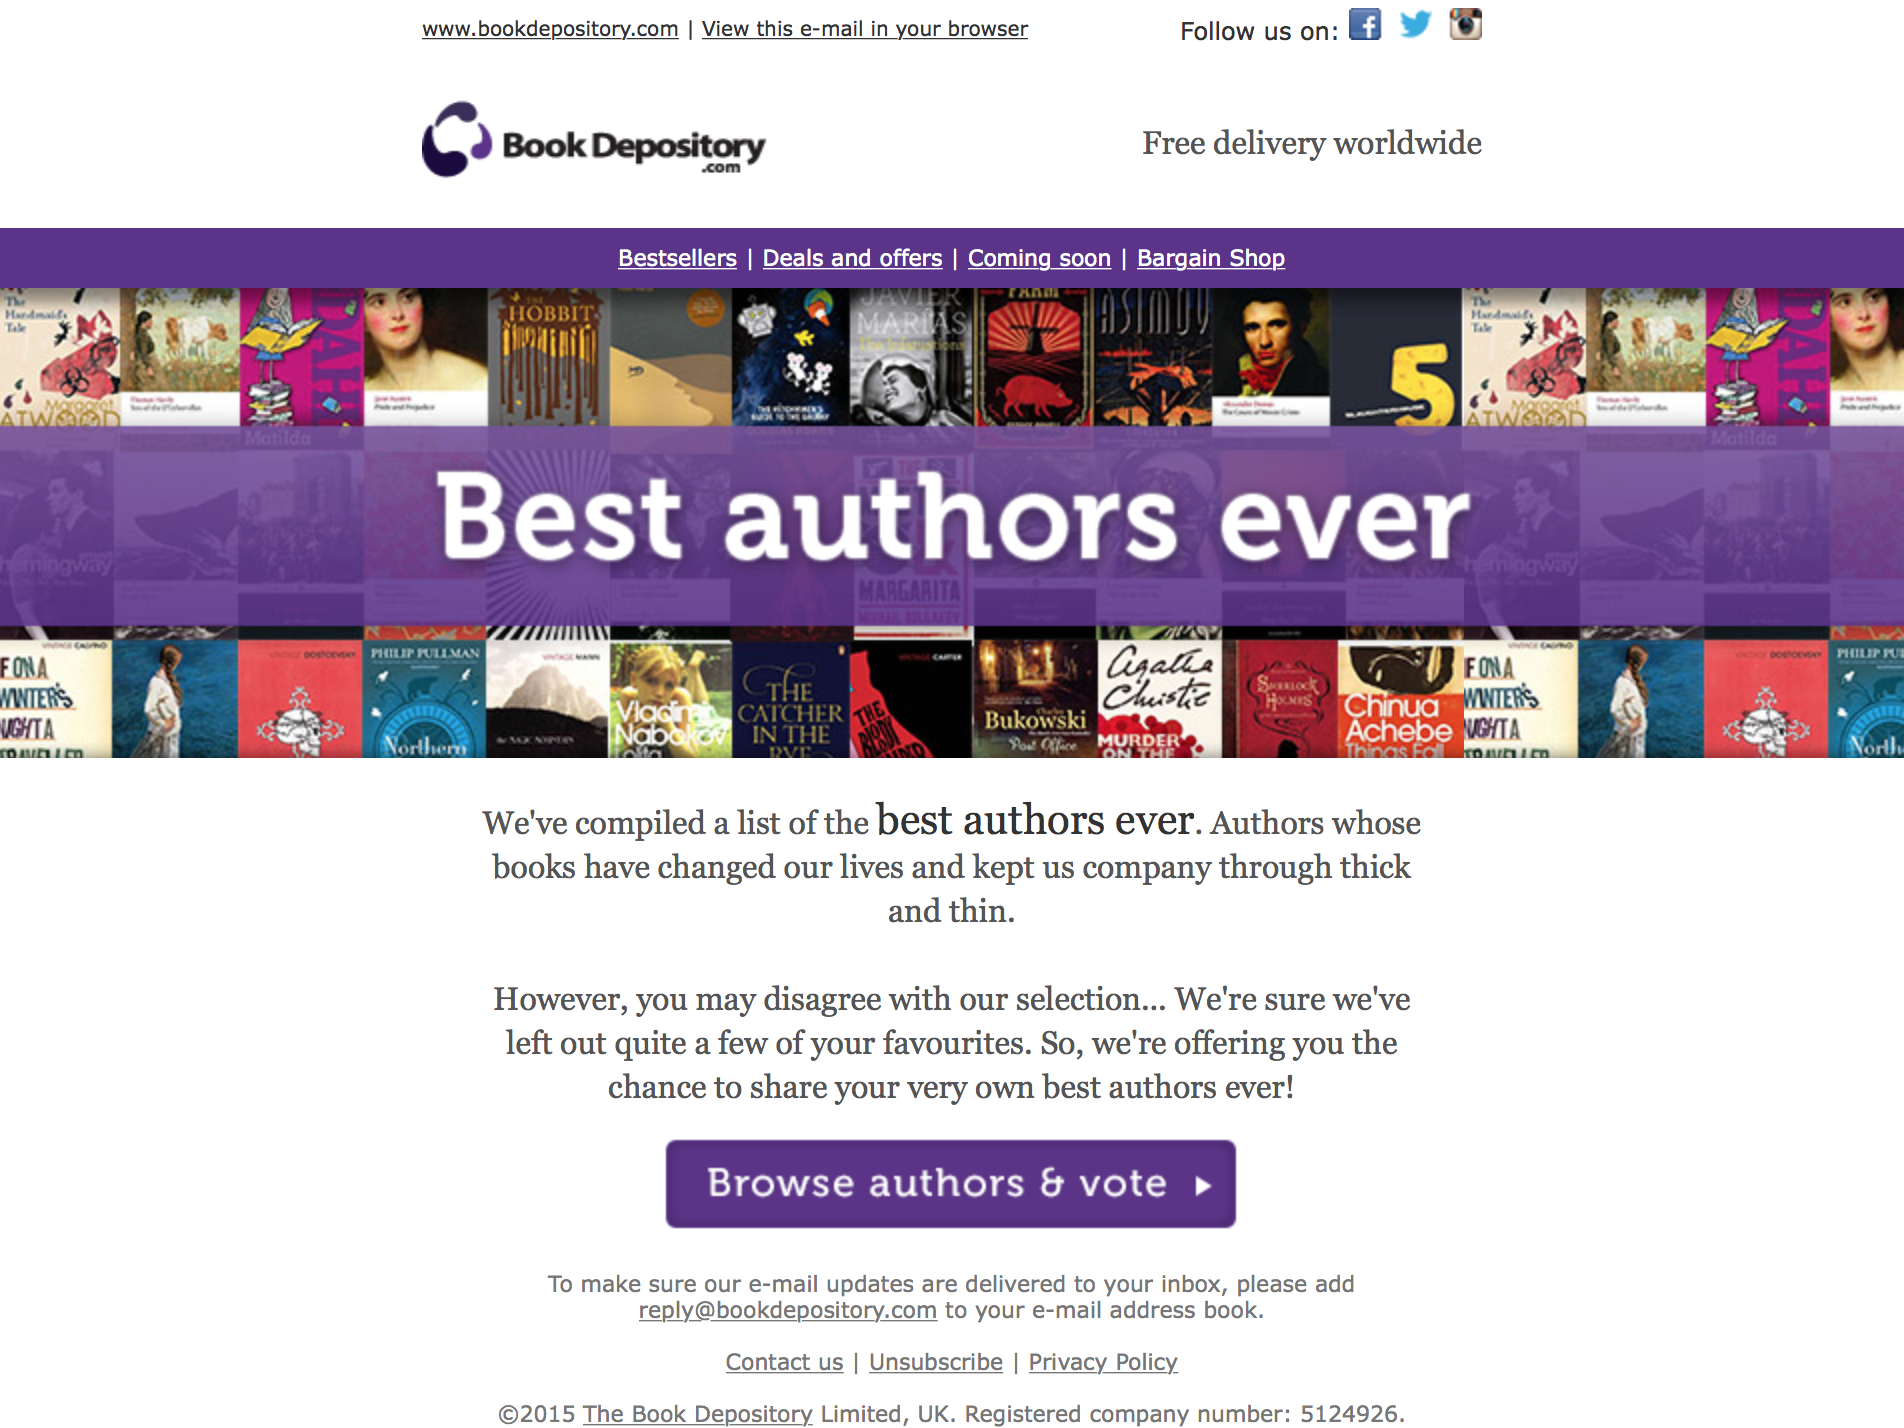 Best Authors email